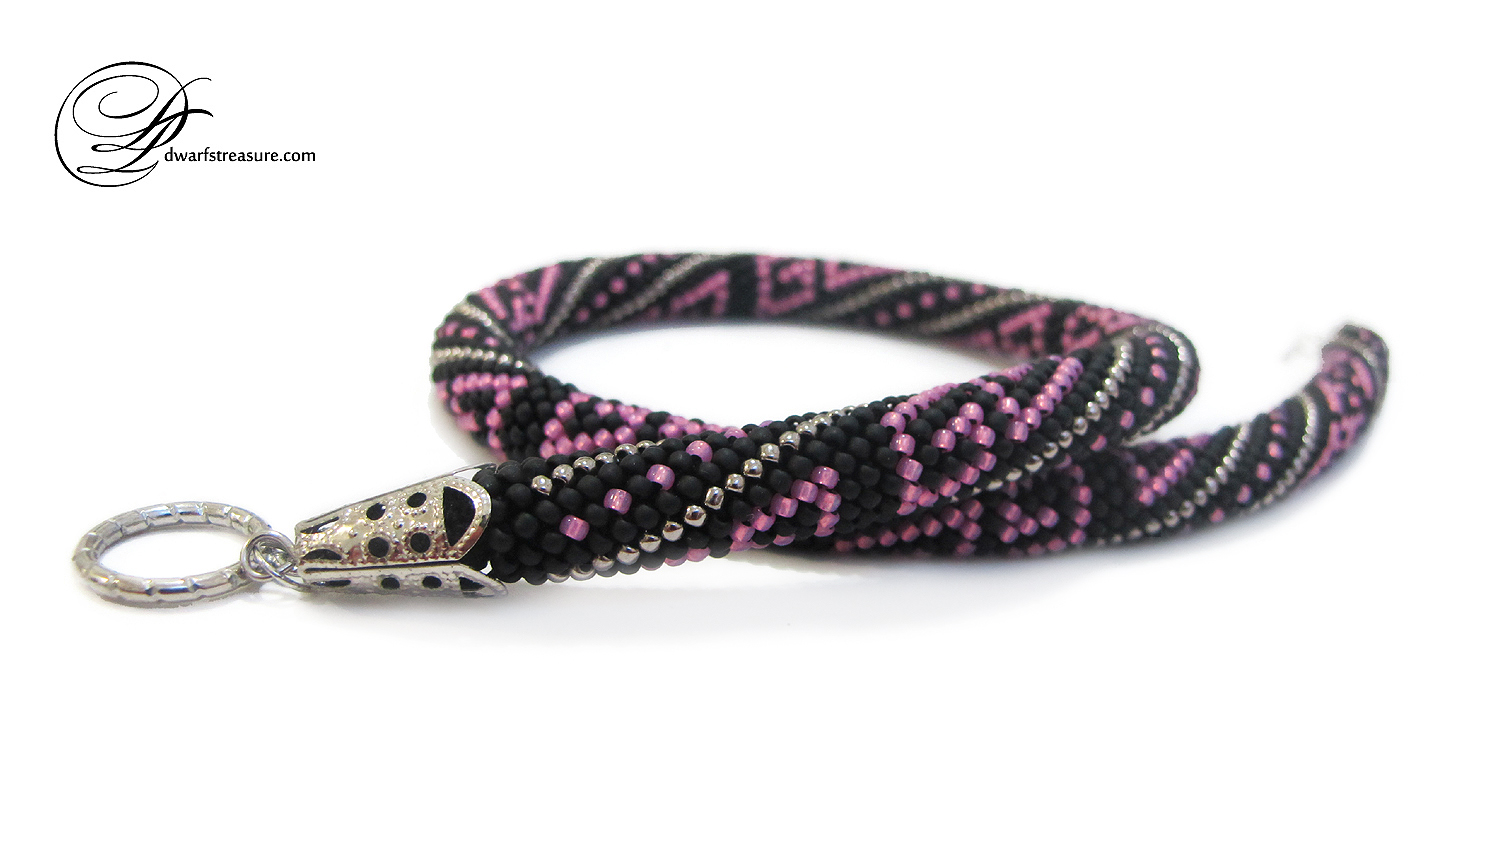 Elegant black seed bead crochet necklace with silver and pink pattern